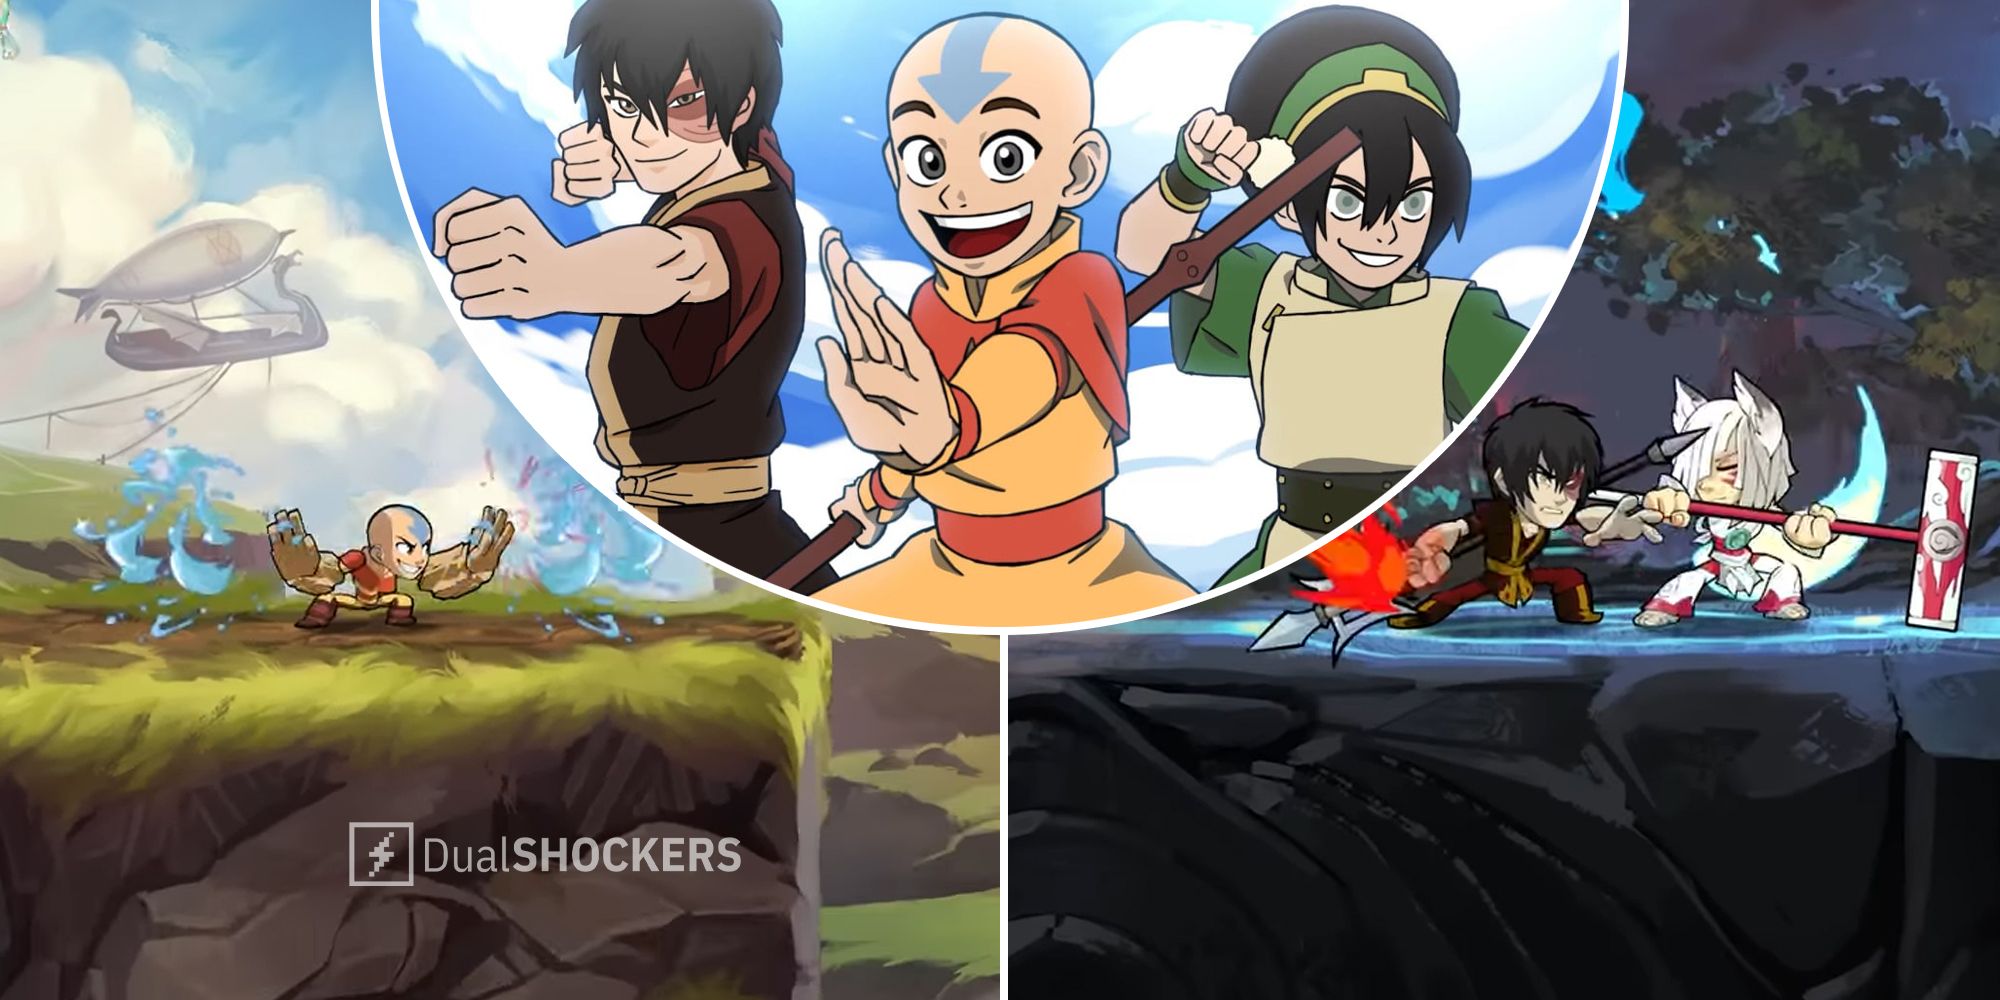 Brawlhalla Announces Avatar: The Last Airbender Cast As Playable Characters